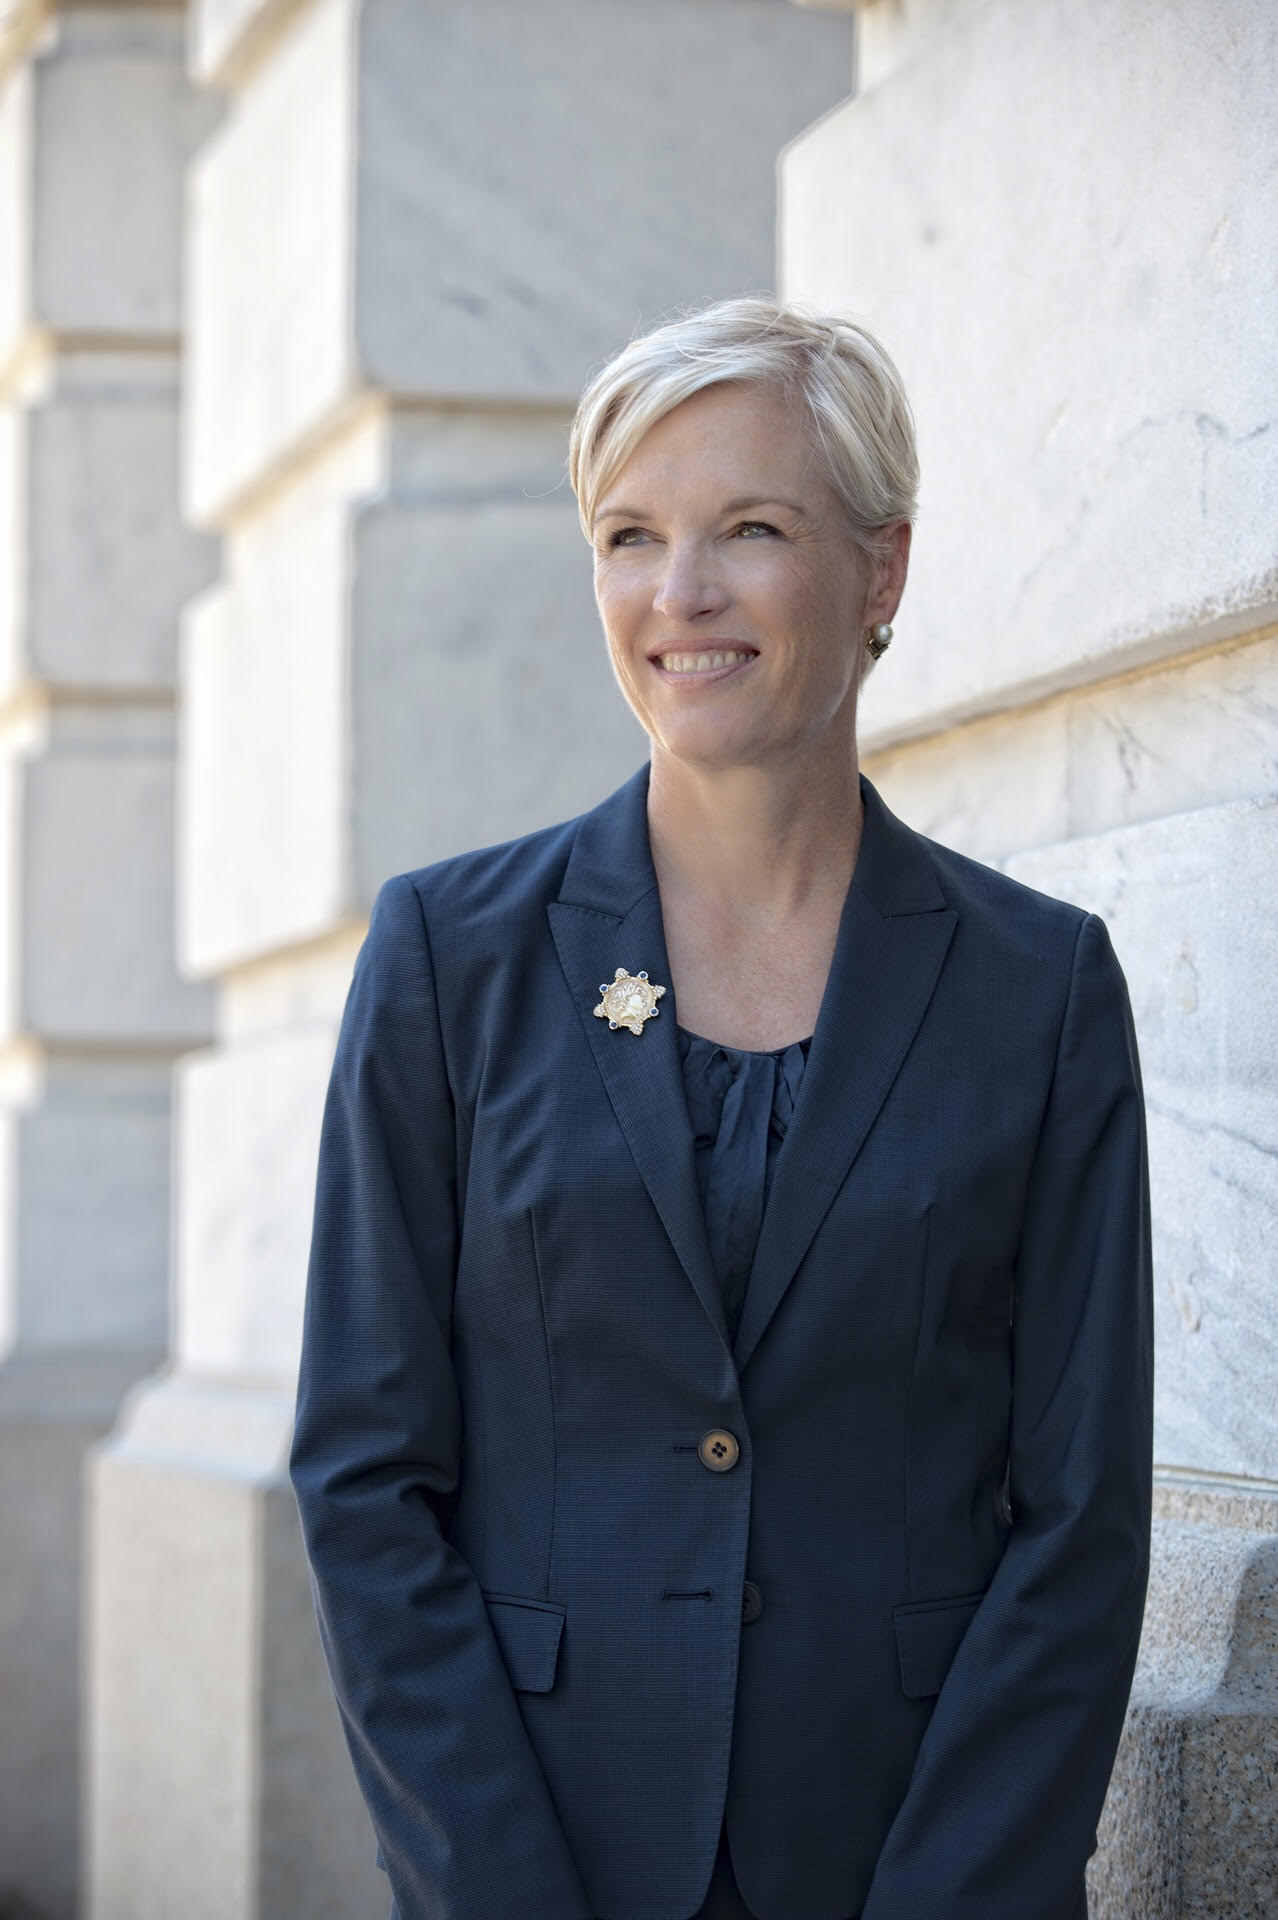 A photo of Cecile Richards